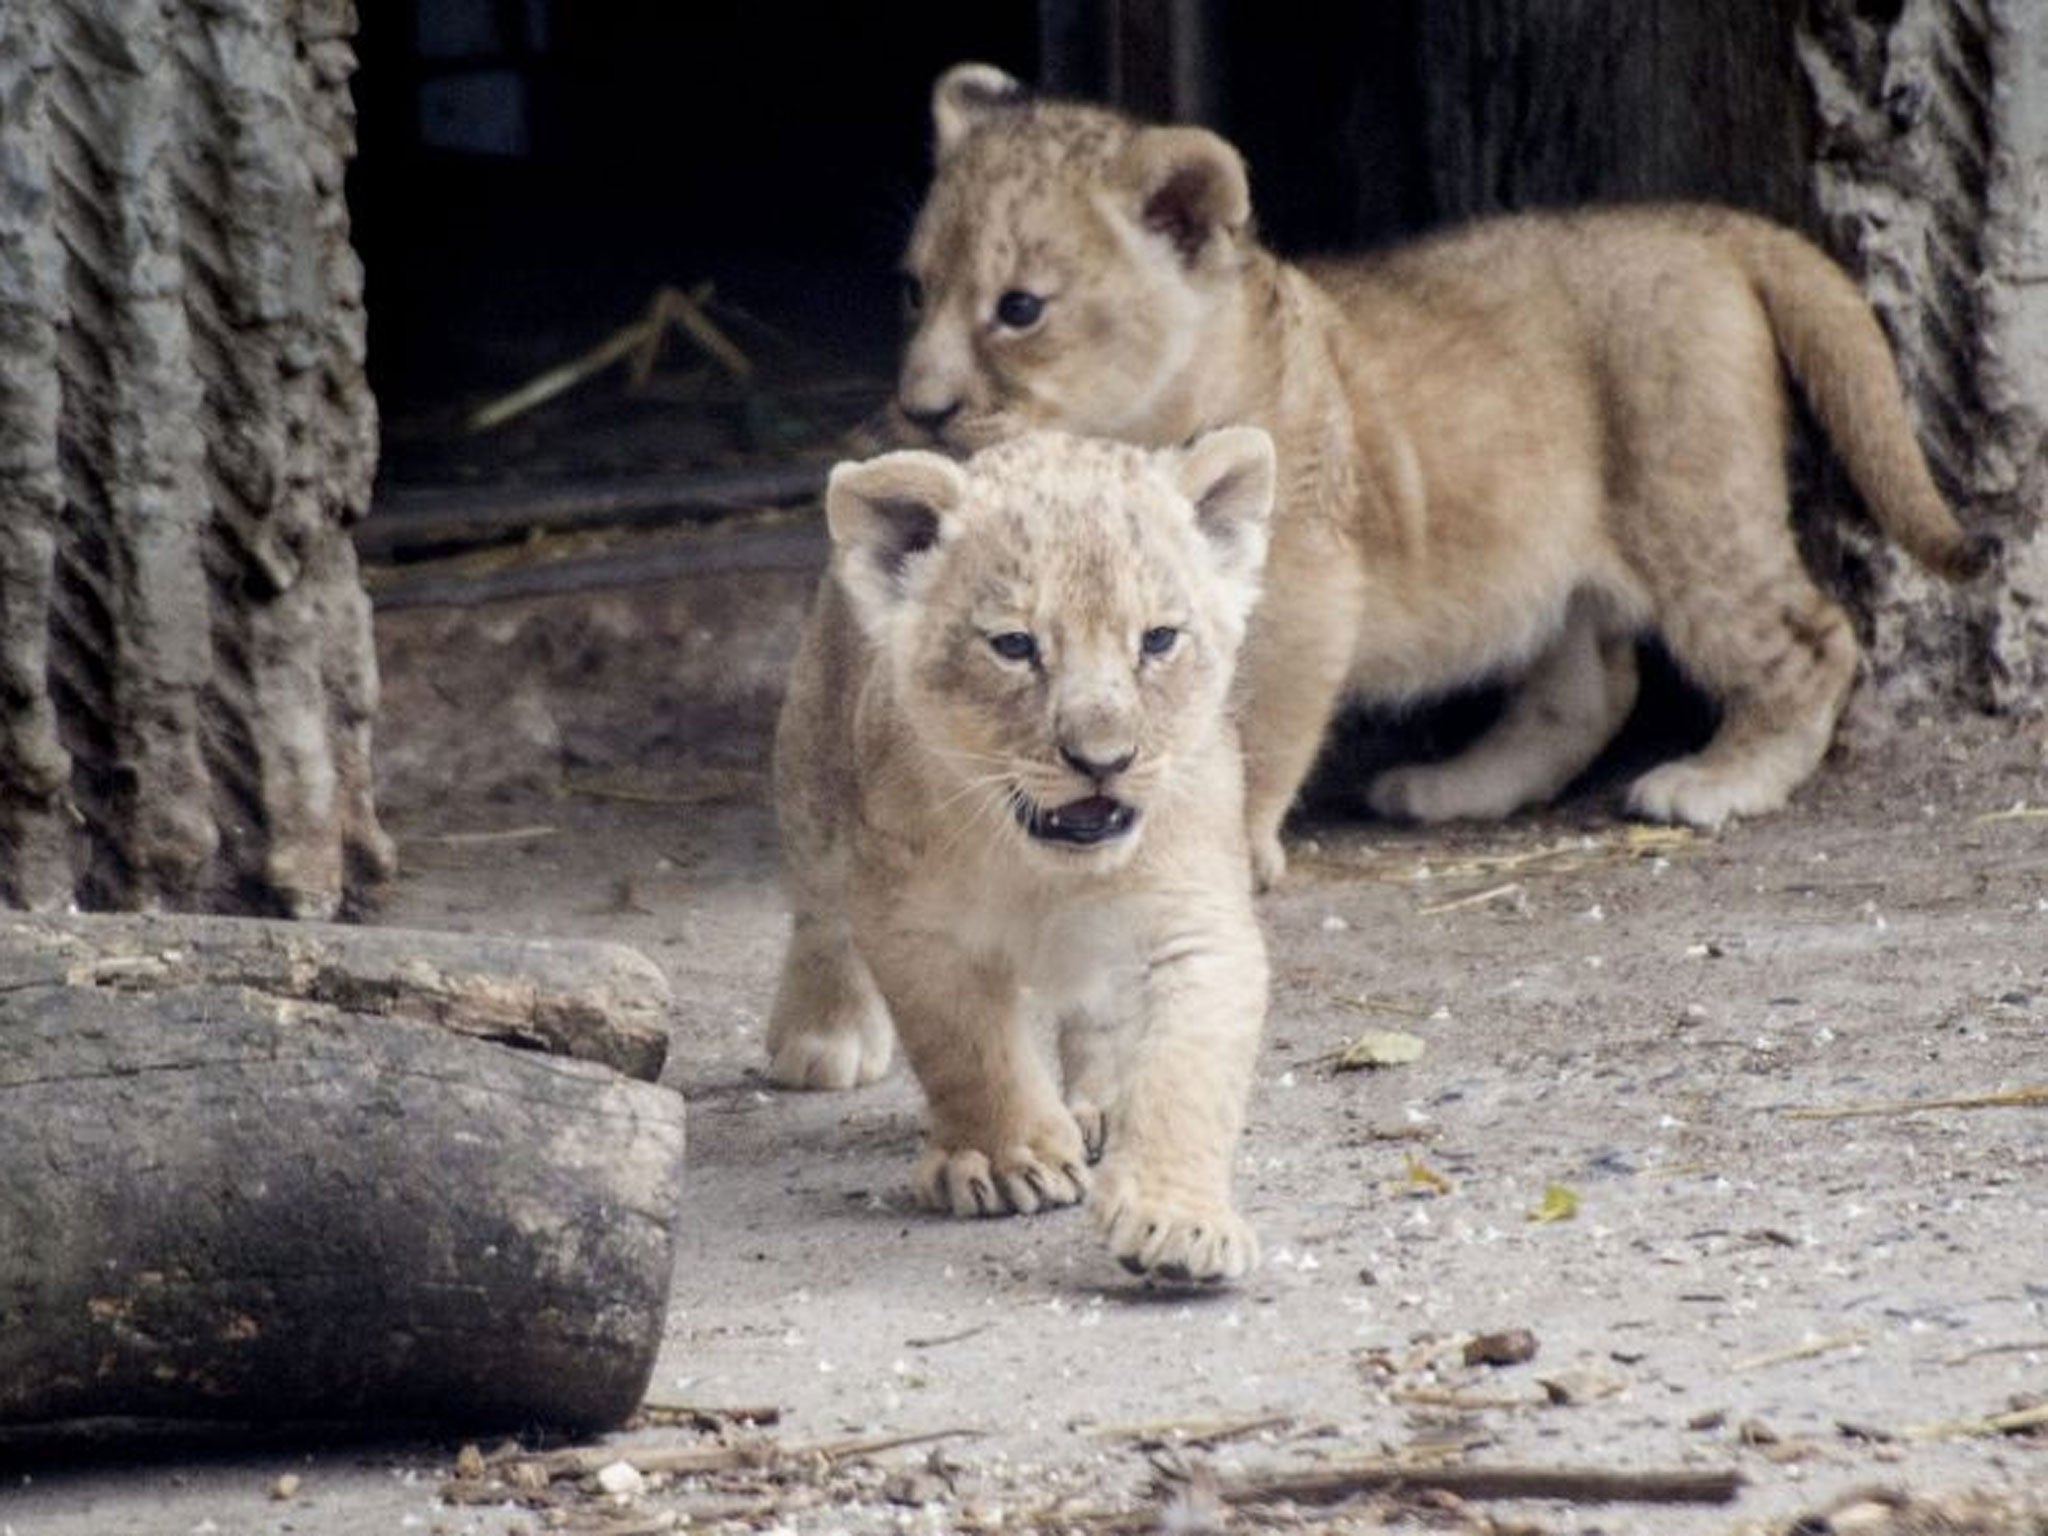 New lion cubs entering the lions enclosure for the first time in Copenhagen Zoo.